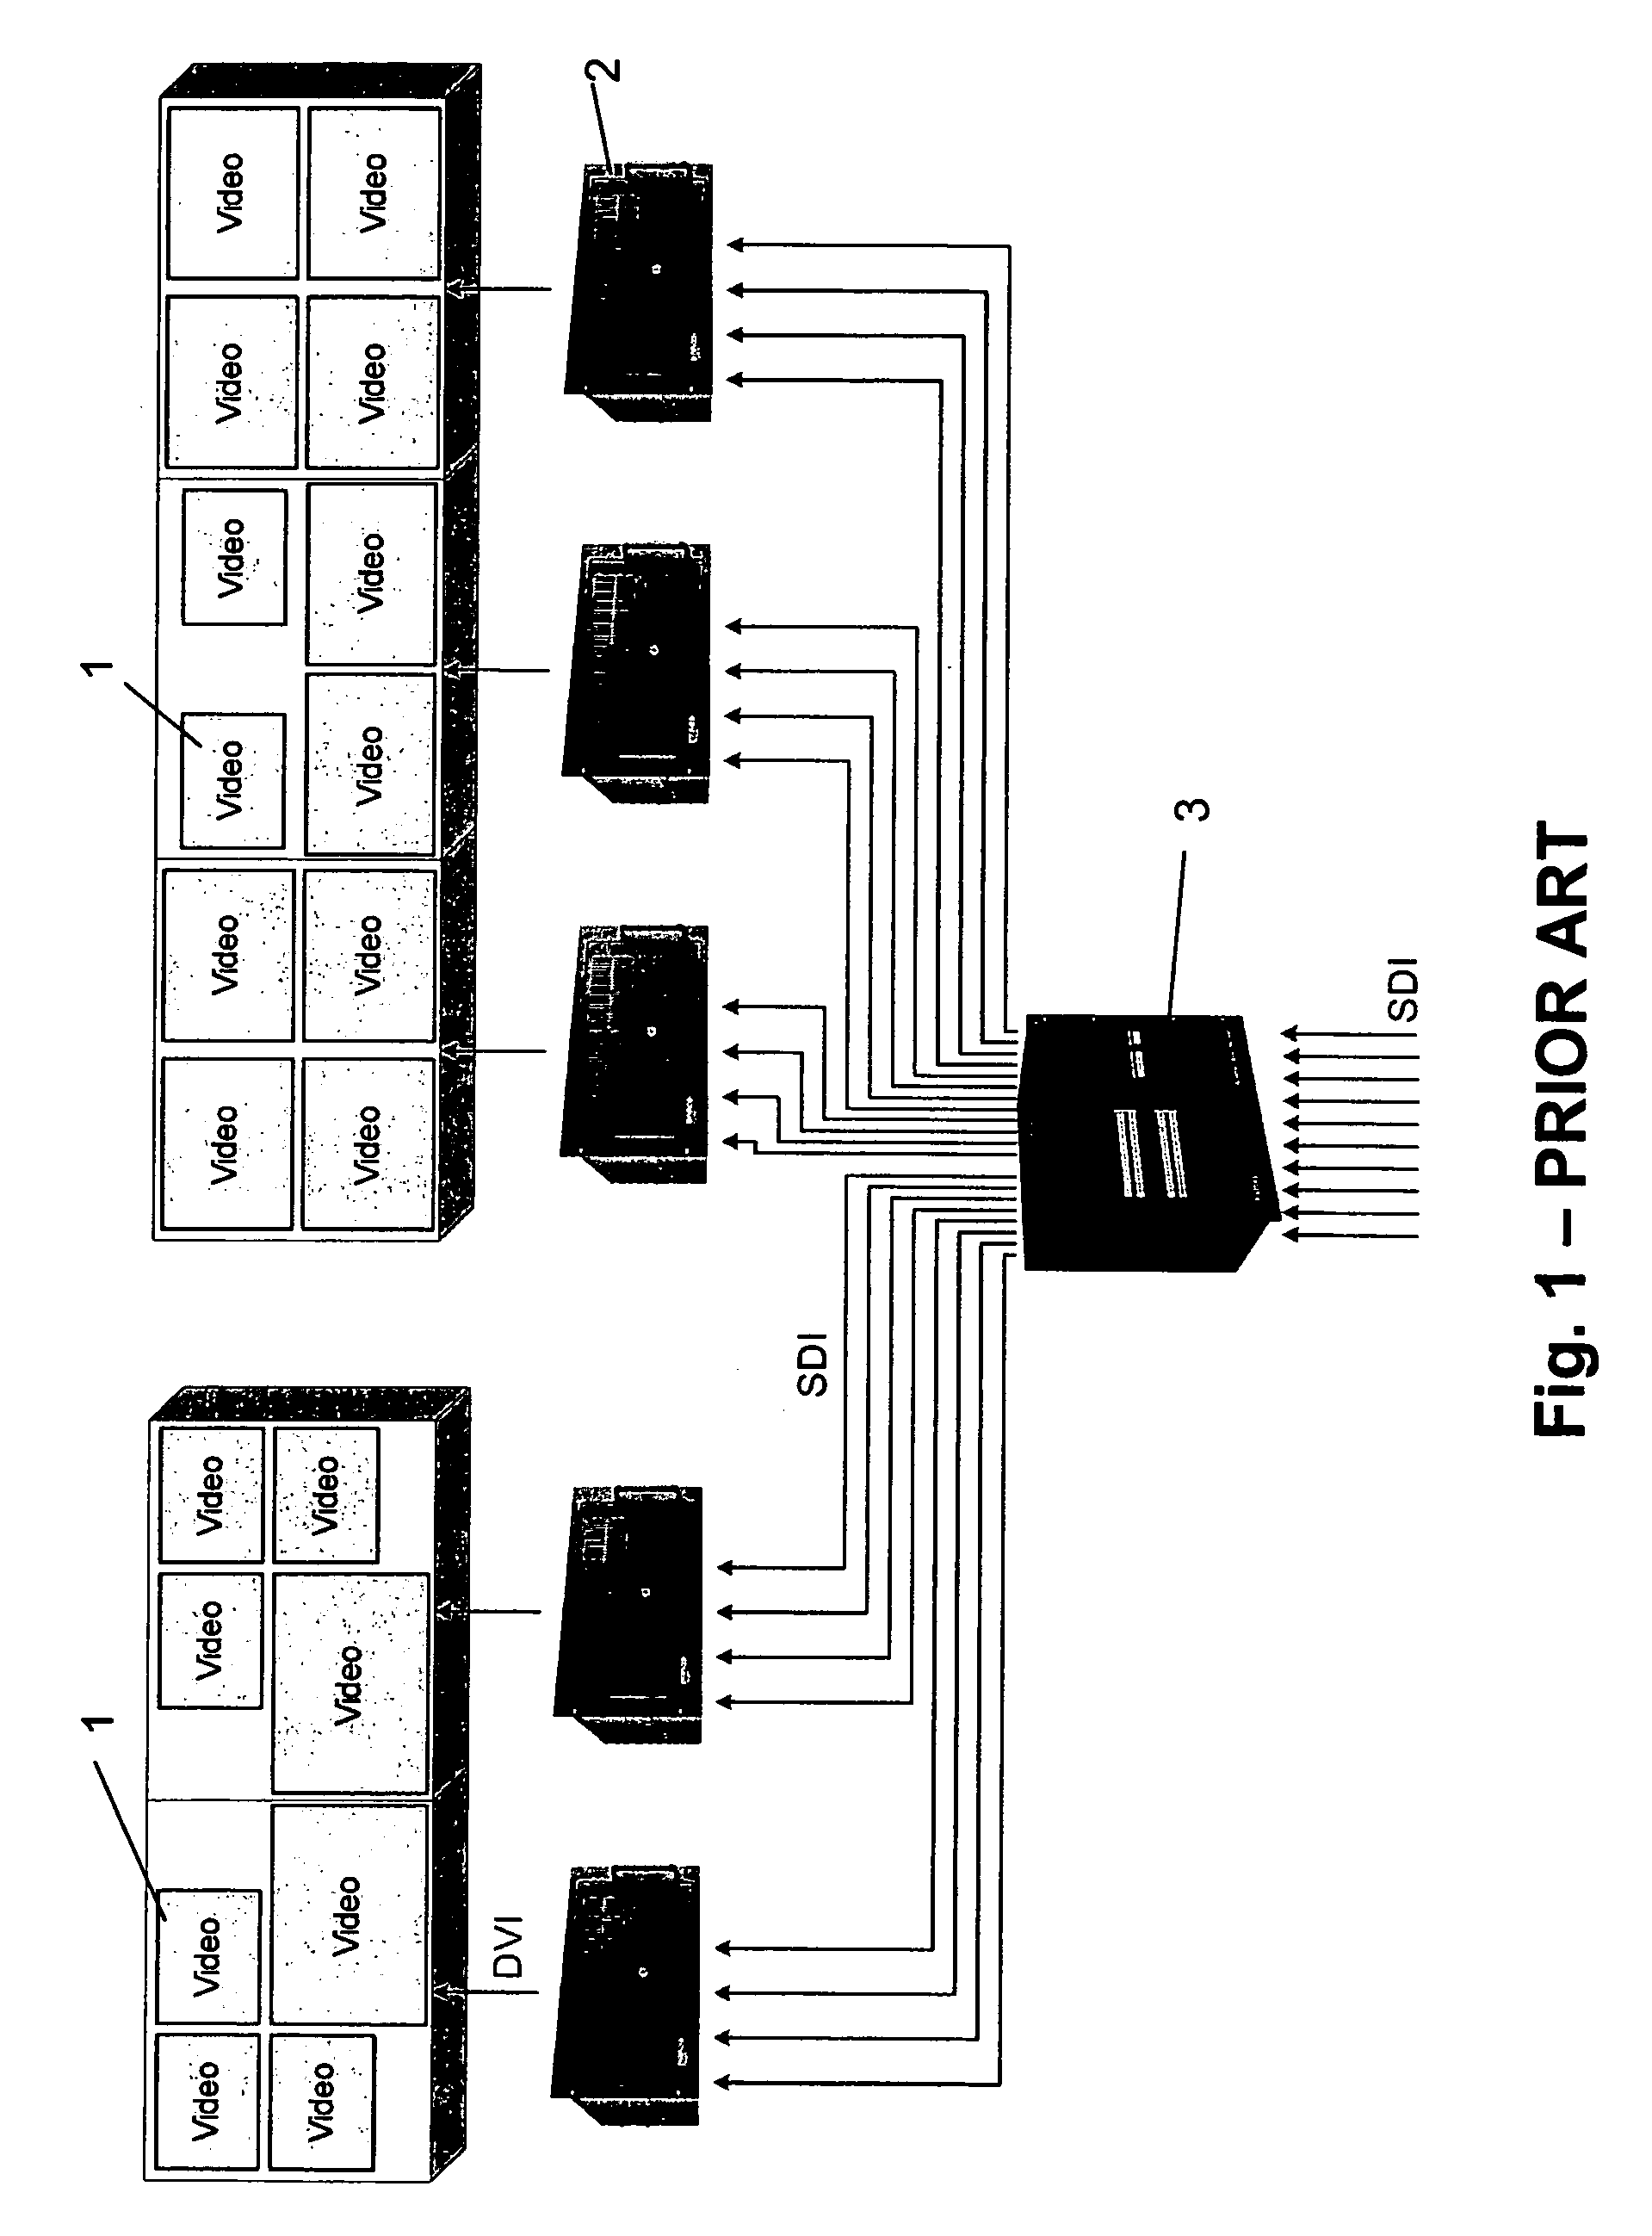 Network displays and method of their operation